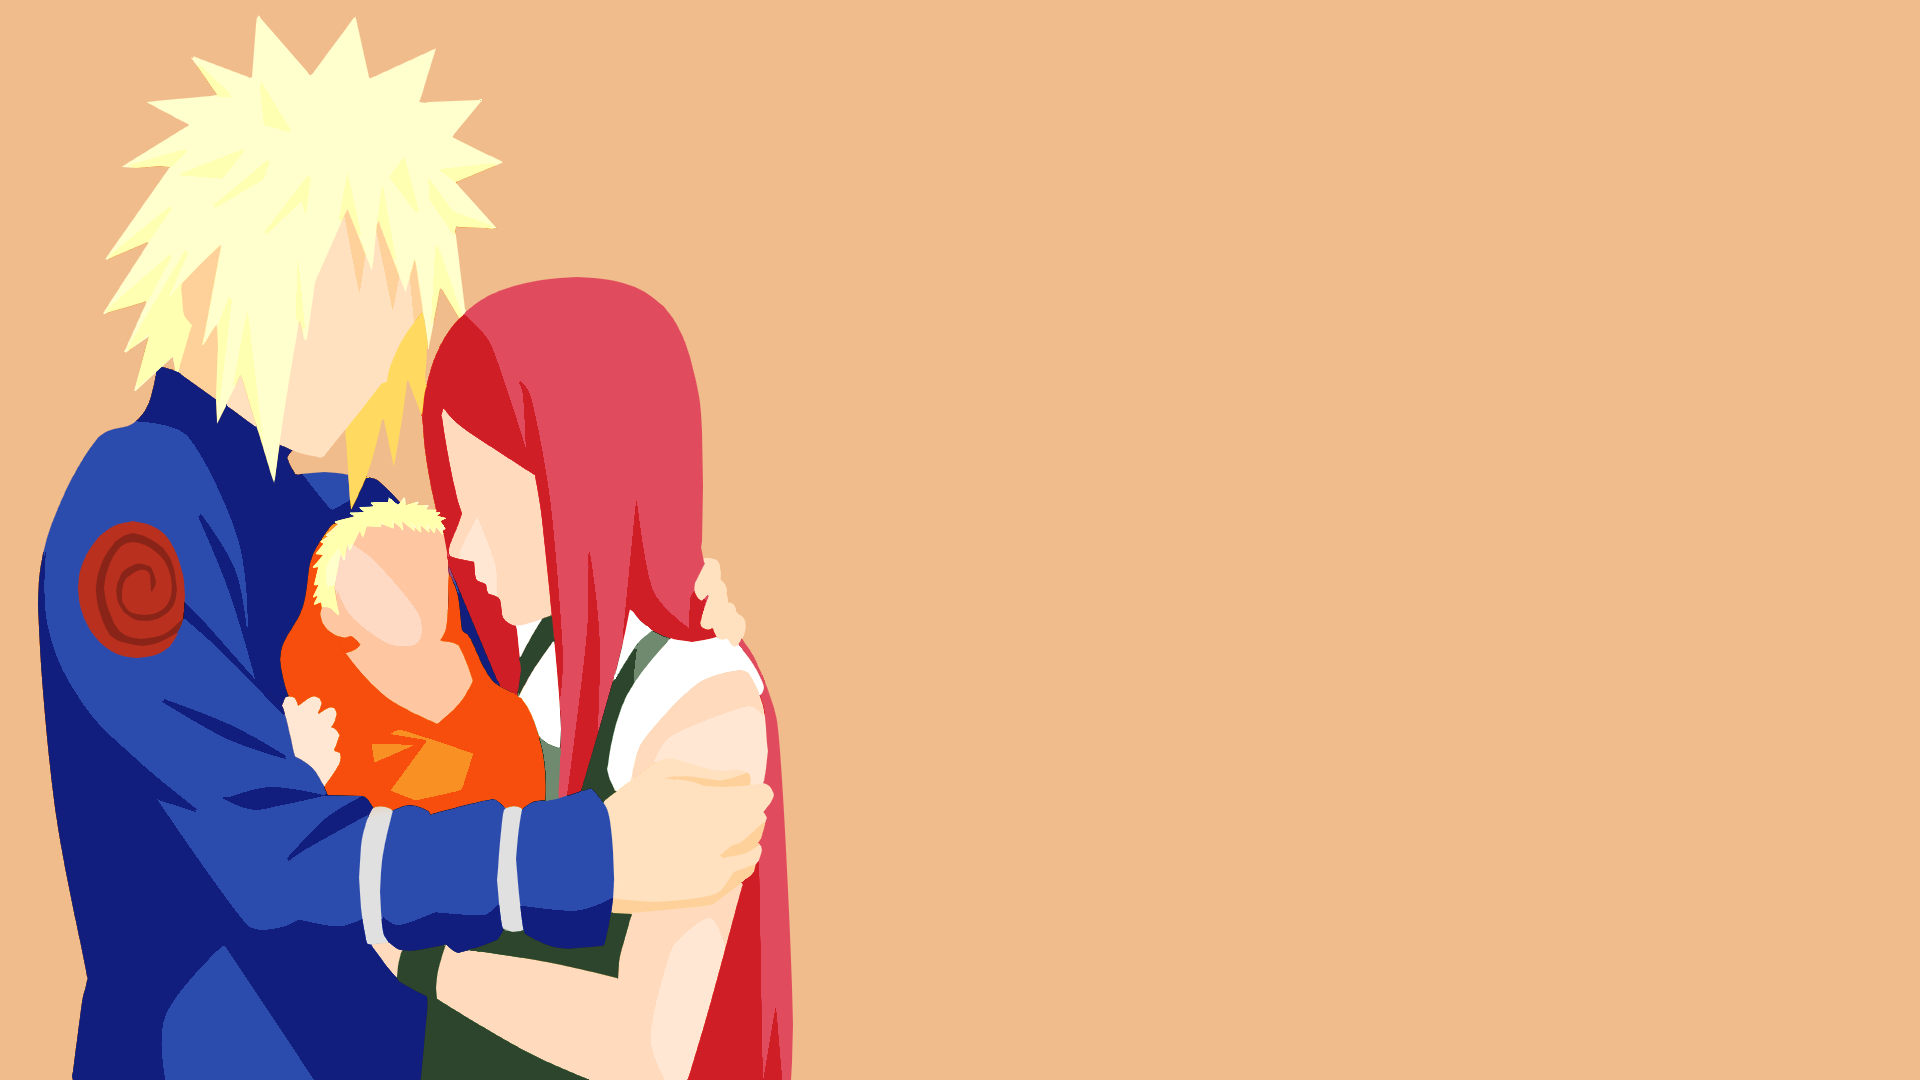 uzumaki family flat Wallpaper Background Image. View, download, comment, and rate. Wallpaper naruto shippuden, Naruto wallpaper, Naruto painting